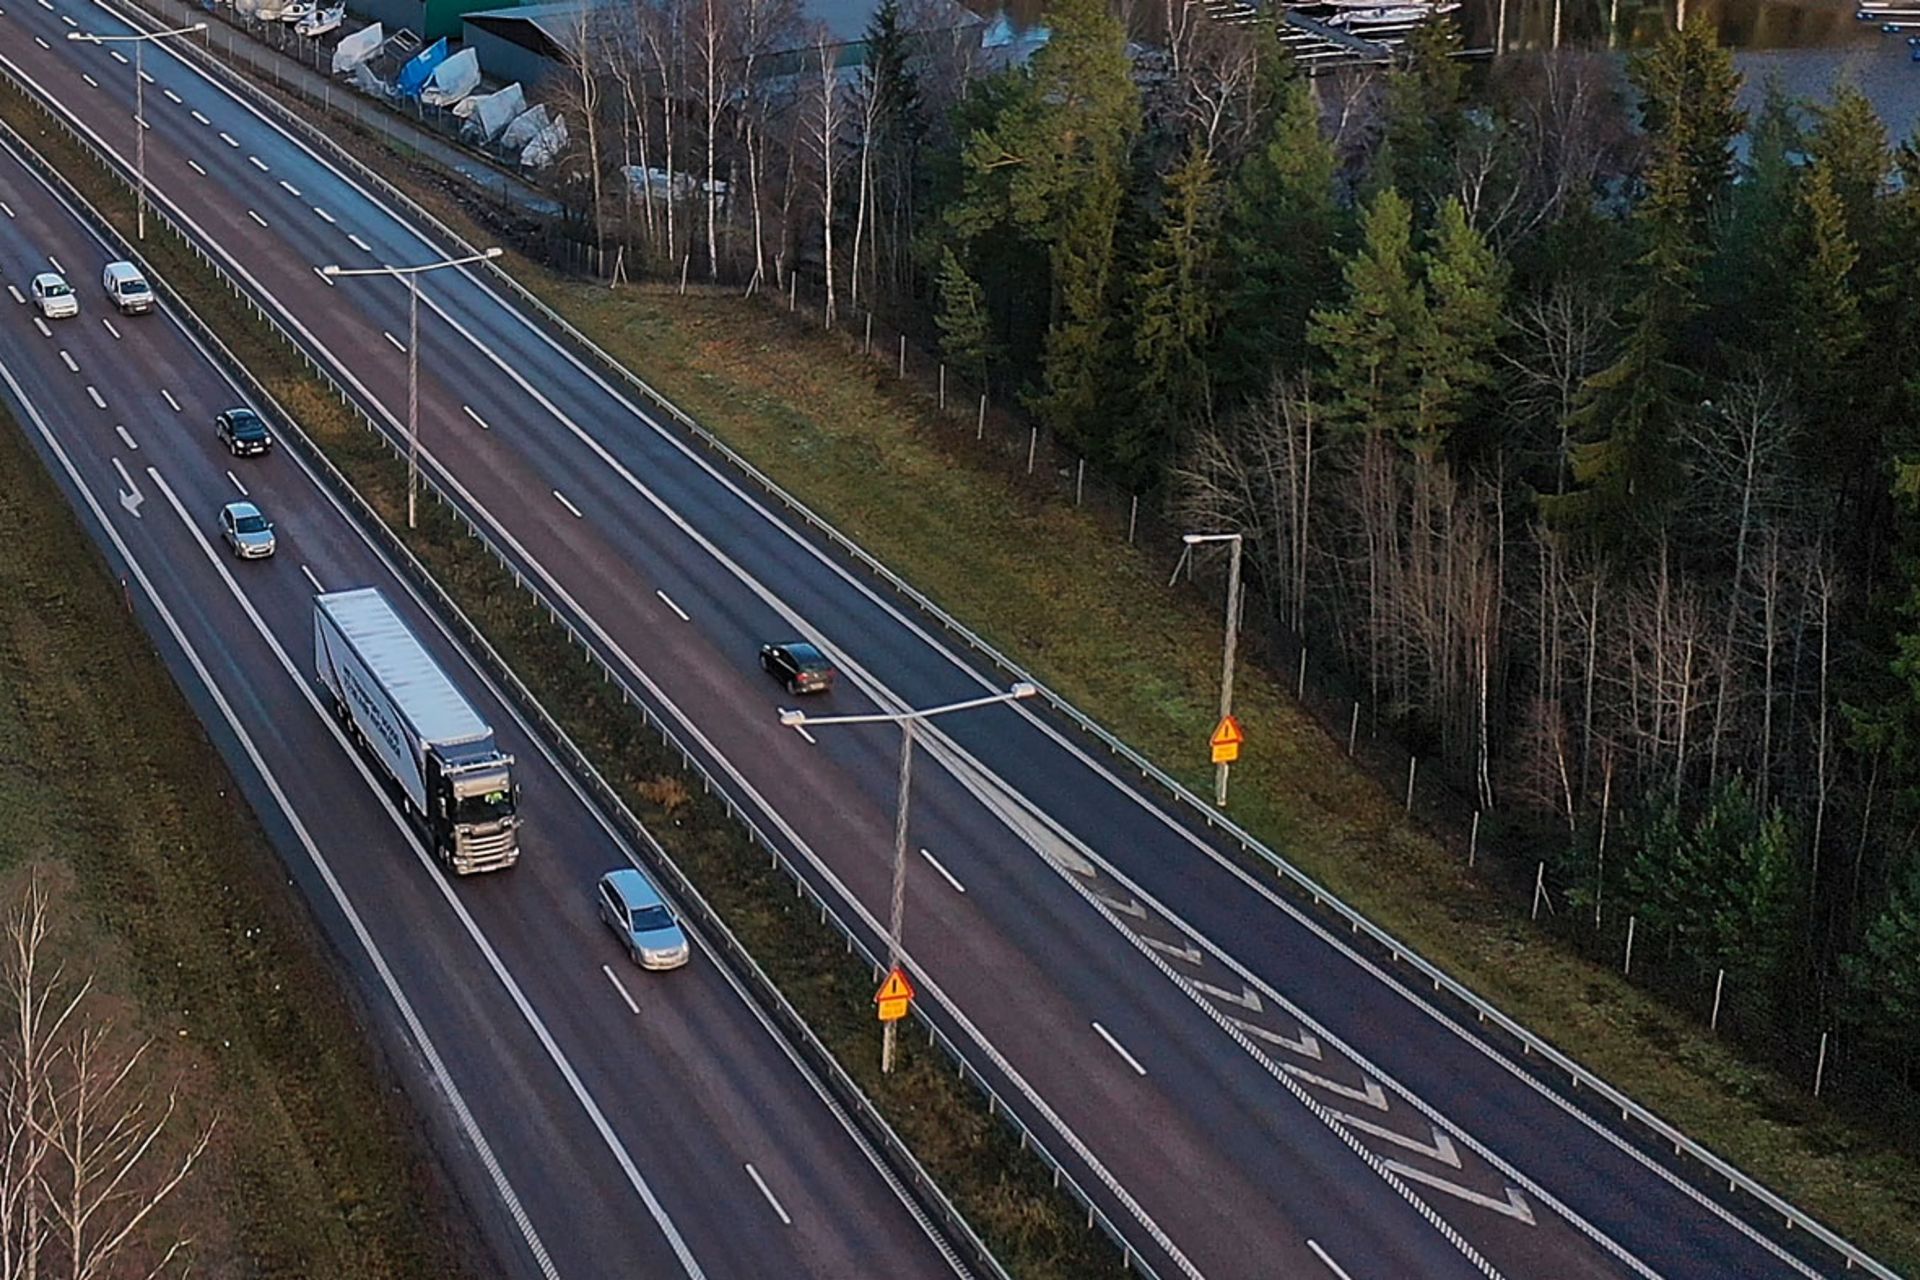 Scania has been granted permission by the Swedish Transport Agency to test self-driving trucks on the E4 motorway between Södertälje and Jönköping.
                 